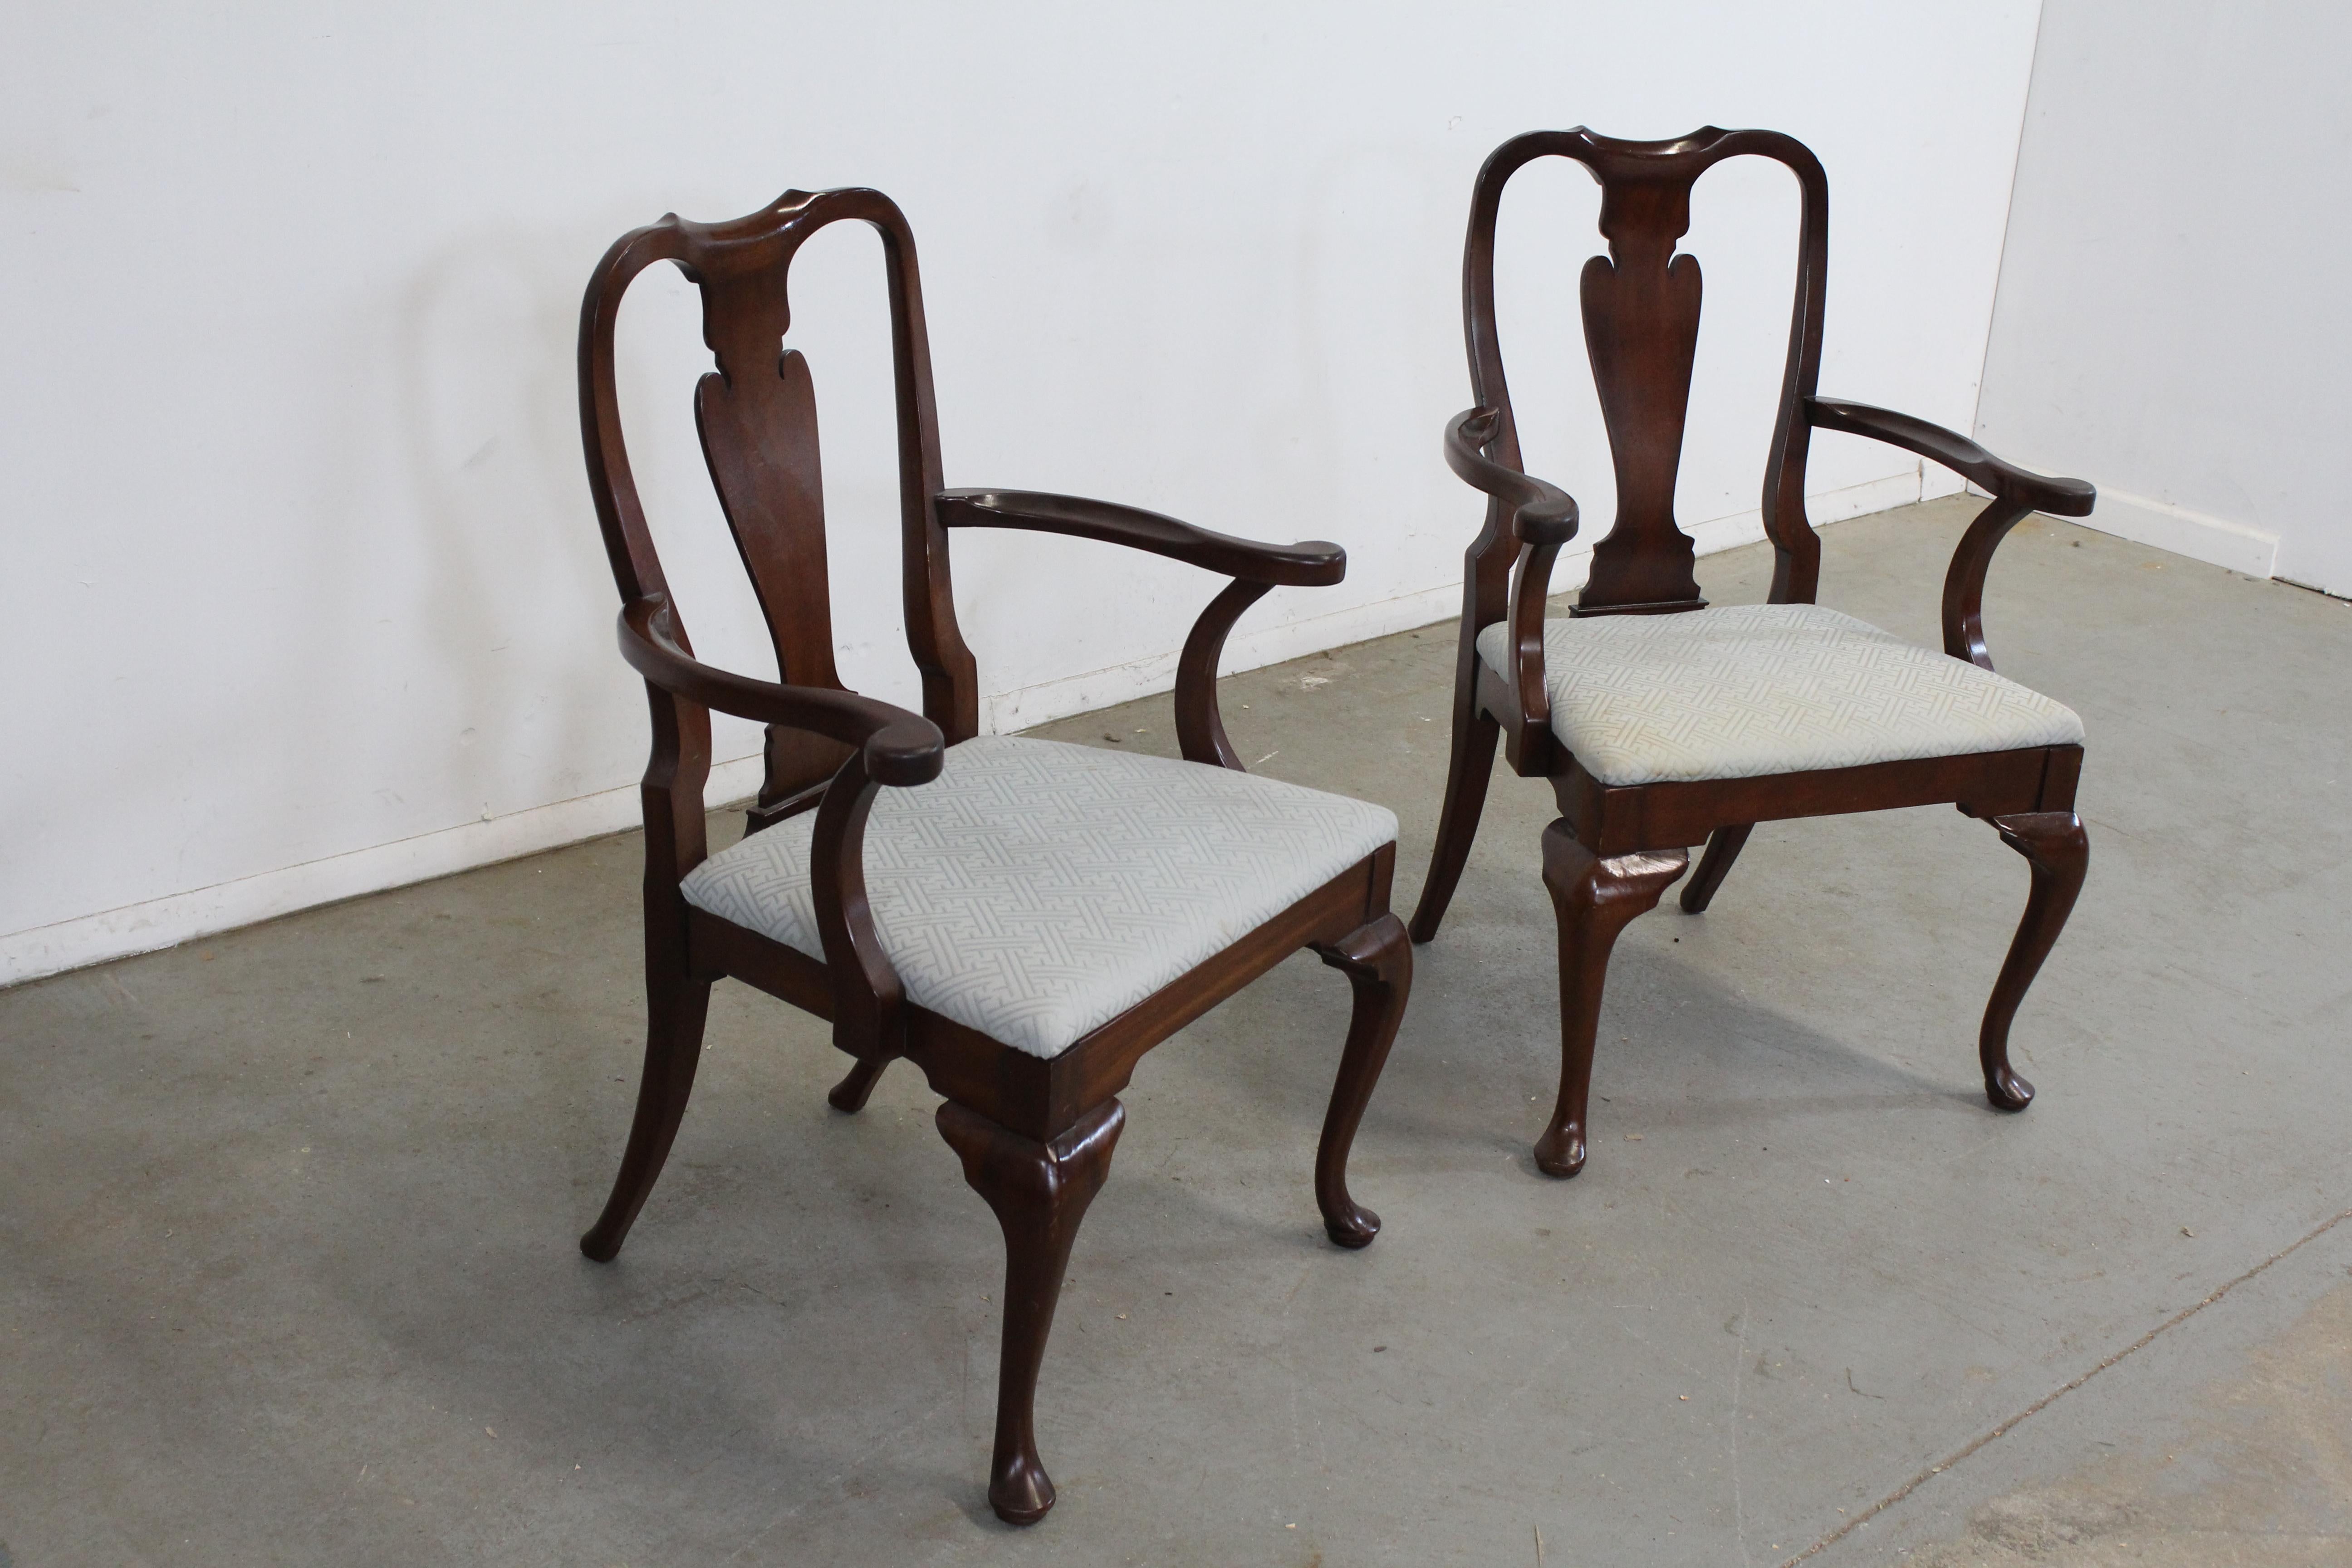 Pair of Reproduction Queen Anne solid mahogany arm dining chairs.

Offered is a pair of reproduction Queen Anne solid mahogany arm dining chairs. They are made of solid mahogany wood and have upholstered seats. In good condition for their age,